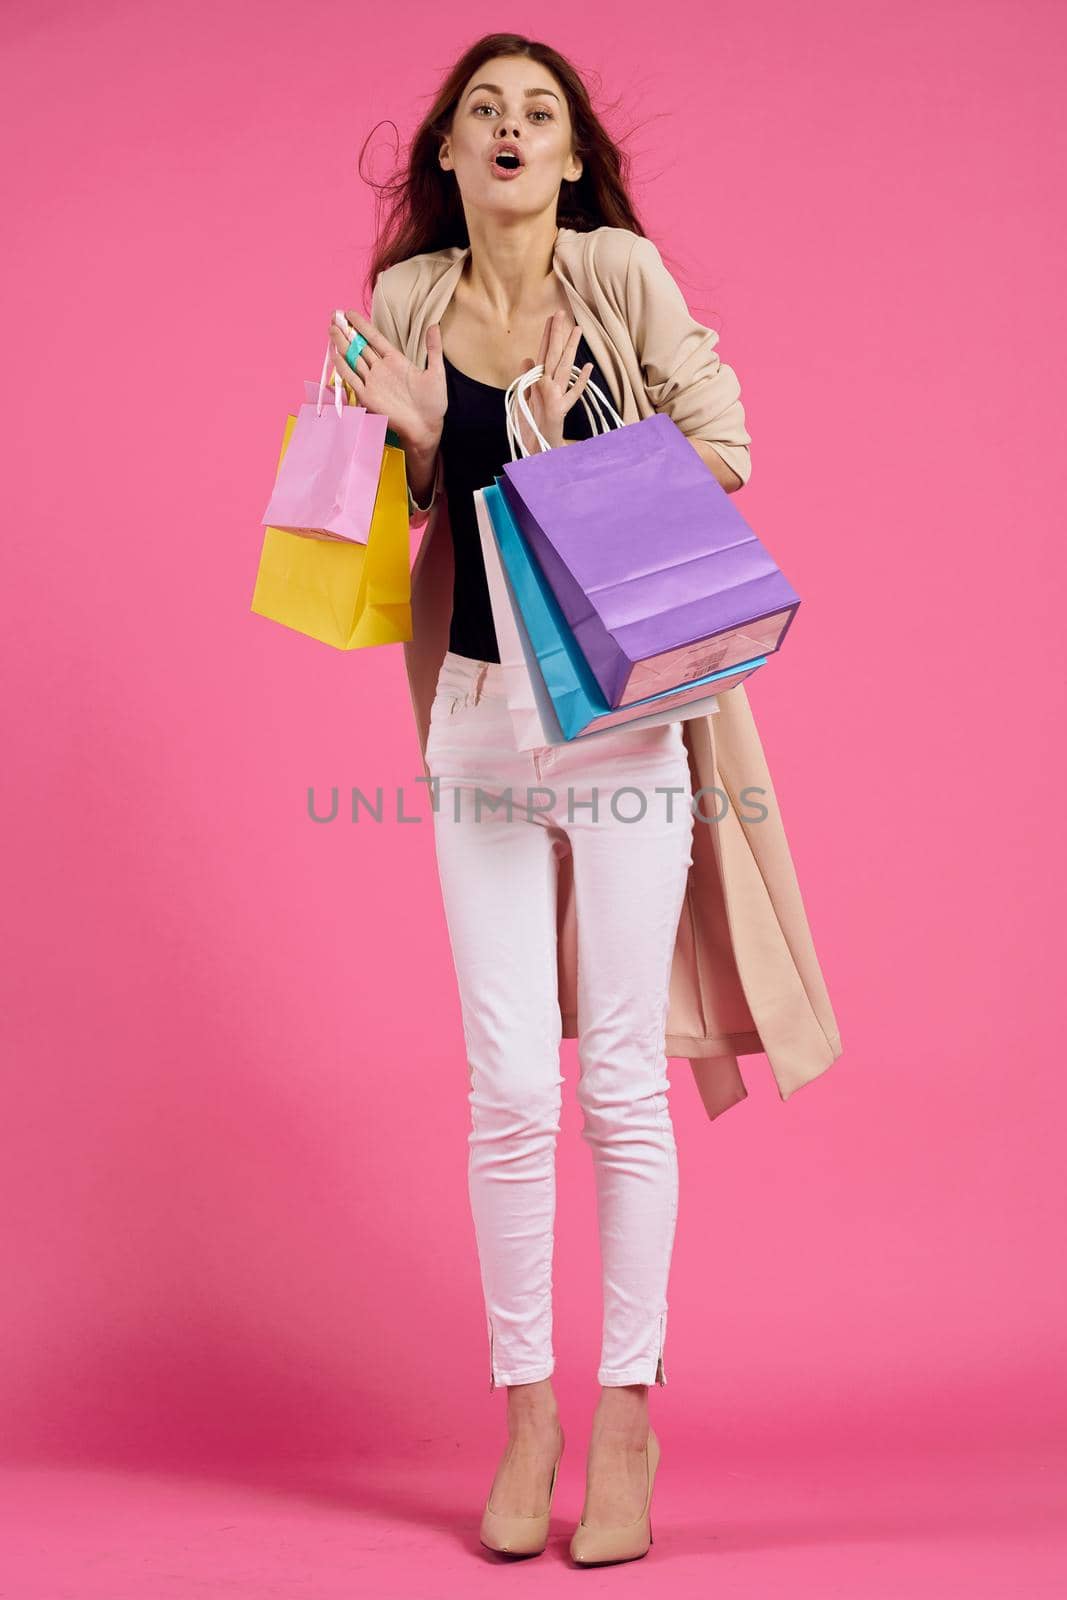 glamorous woman attractive look shopping smile summer style pink background. High quality photo